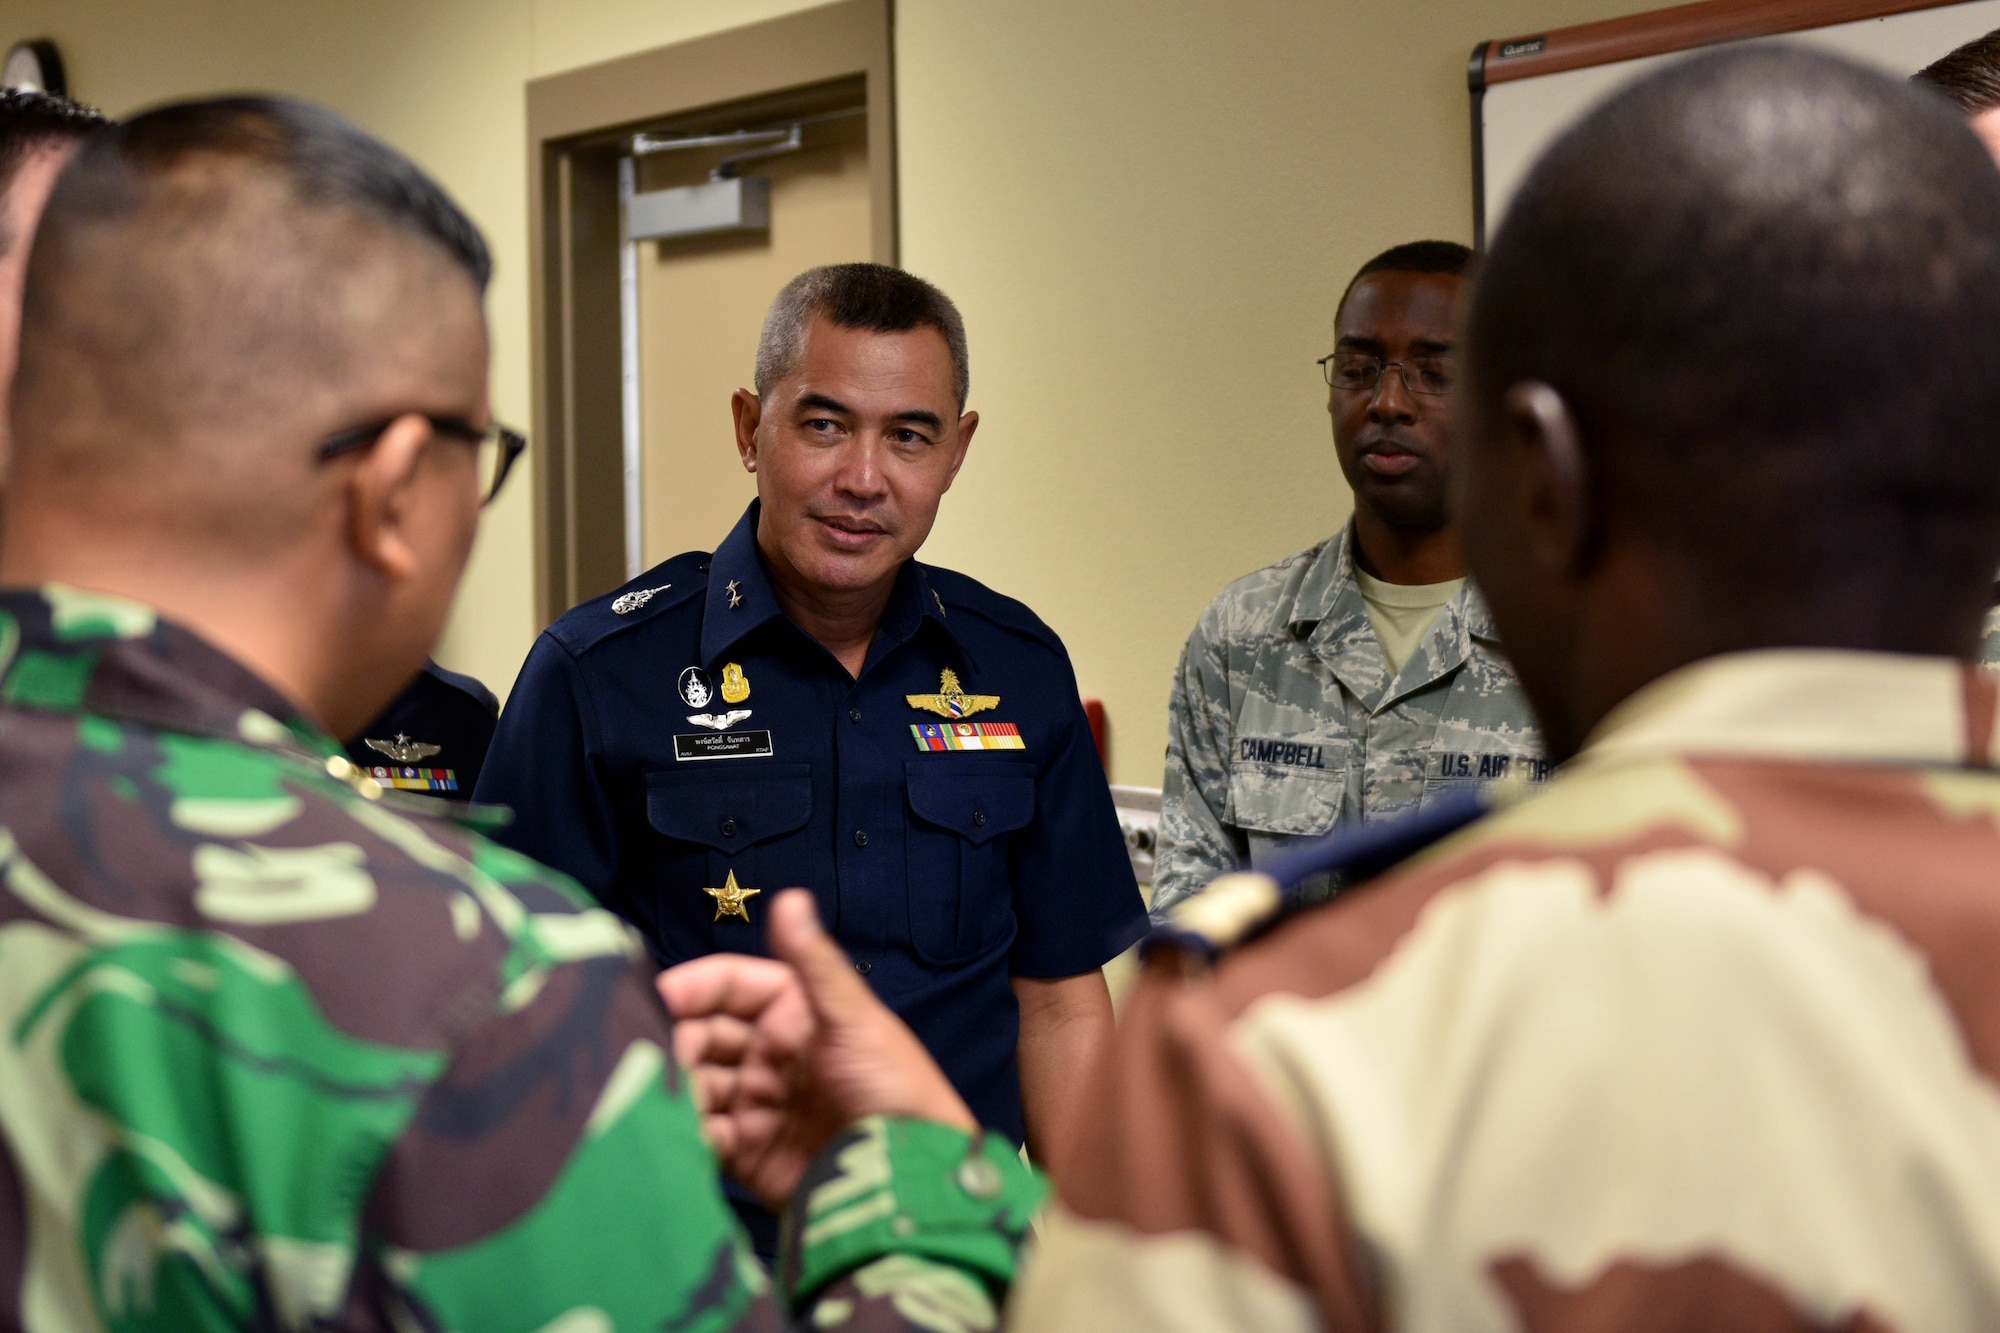 International military students provide Royal Thai air force Air Vice Marshall Pongsawat Jantasarn, their perspective on training alongside 315th Training Squadron students in the Consolidated Learning Center on Goodfellow Air Force Base, Texas, Aug. 2, 2018. The team observed a daylong-integrated analytics exercise by the 315th TRS’s intelligence officer students and 11 international students from nine different countries. (U.S. Air Force photo by Senior Airman Randall Moose/Released)